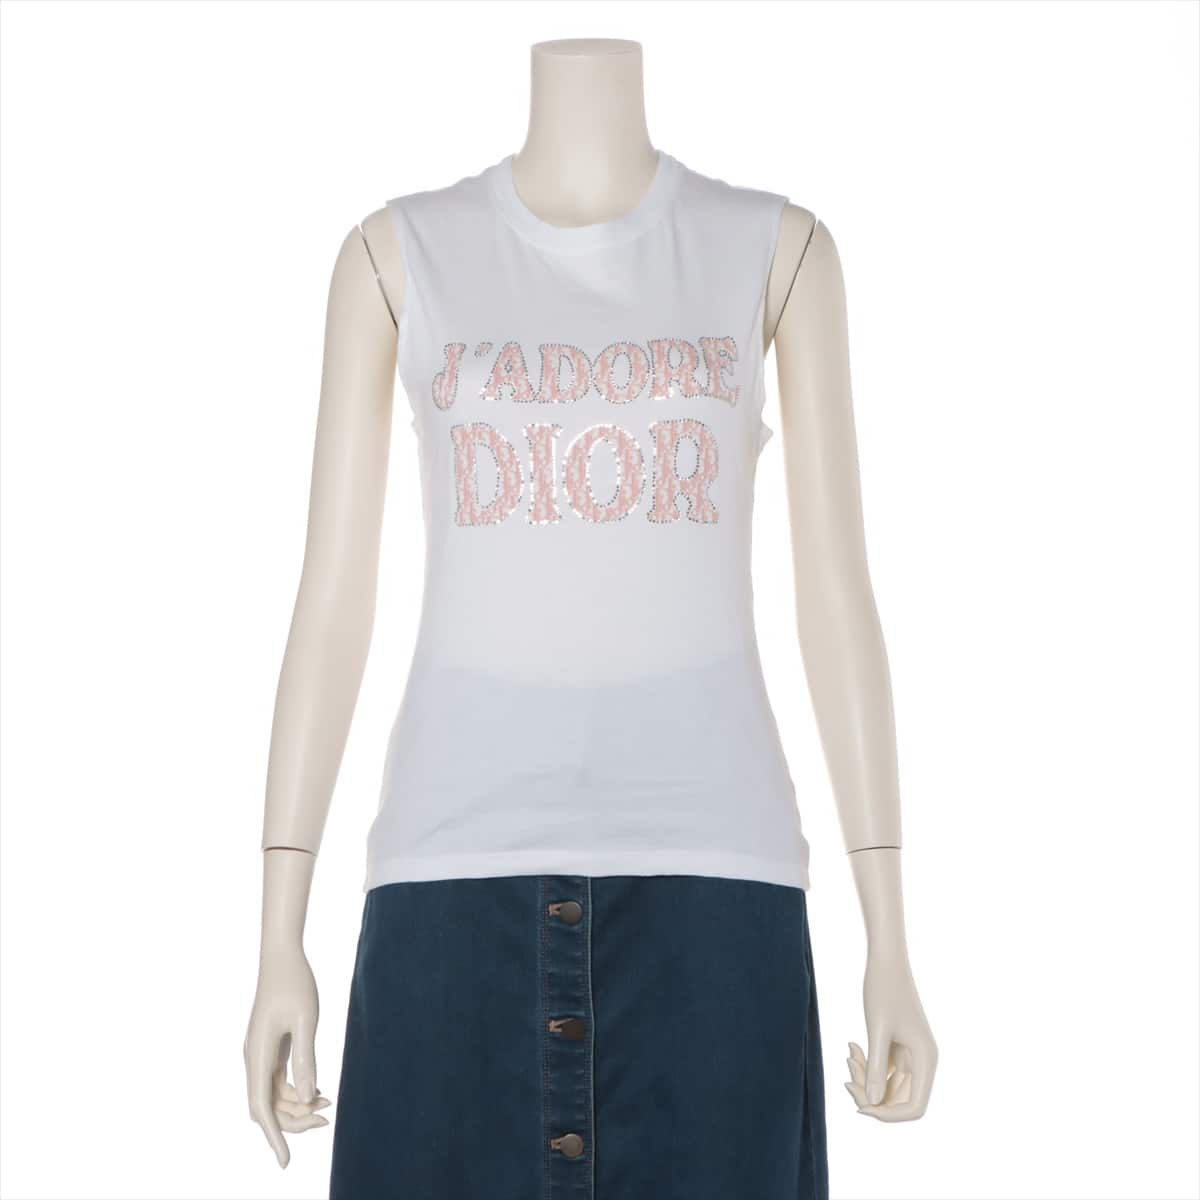 Christian Dior Trotter Year 04 Cotton Tank top F38 Ladies' White  J’ADORE 4P16155304